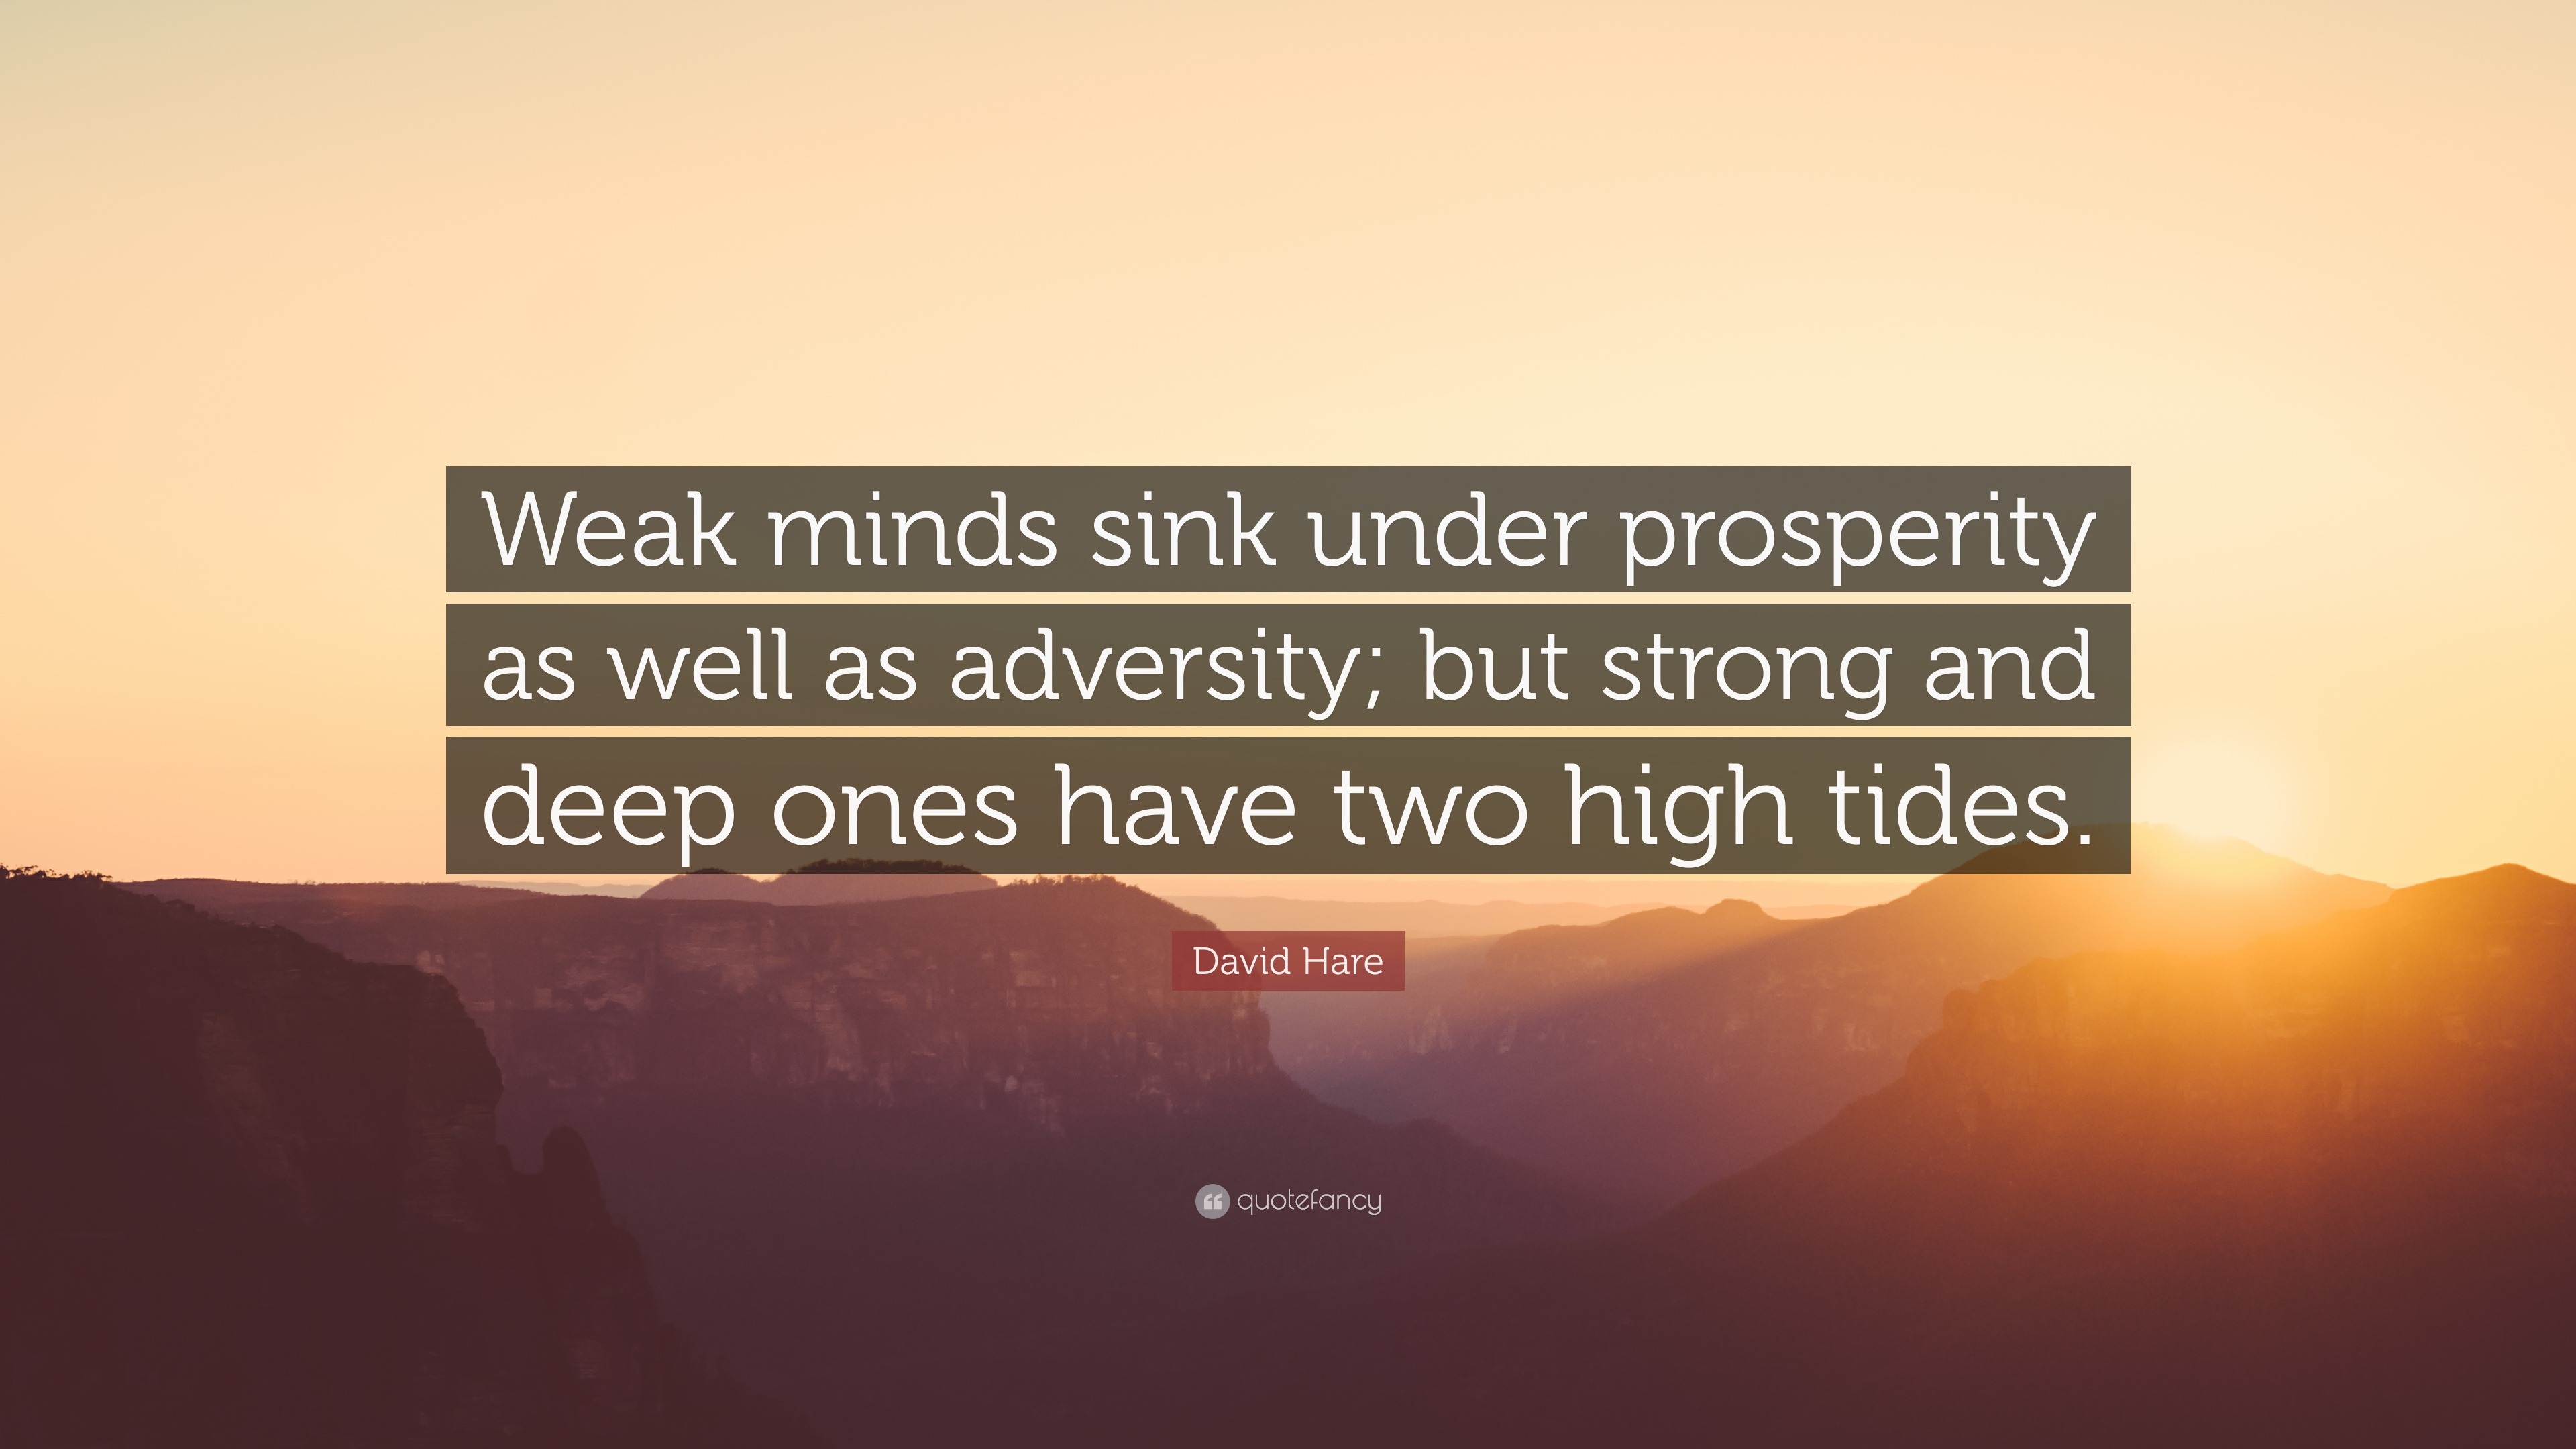 David Hare Quote: “Weak minds sink under prosperity as well as